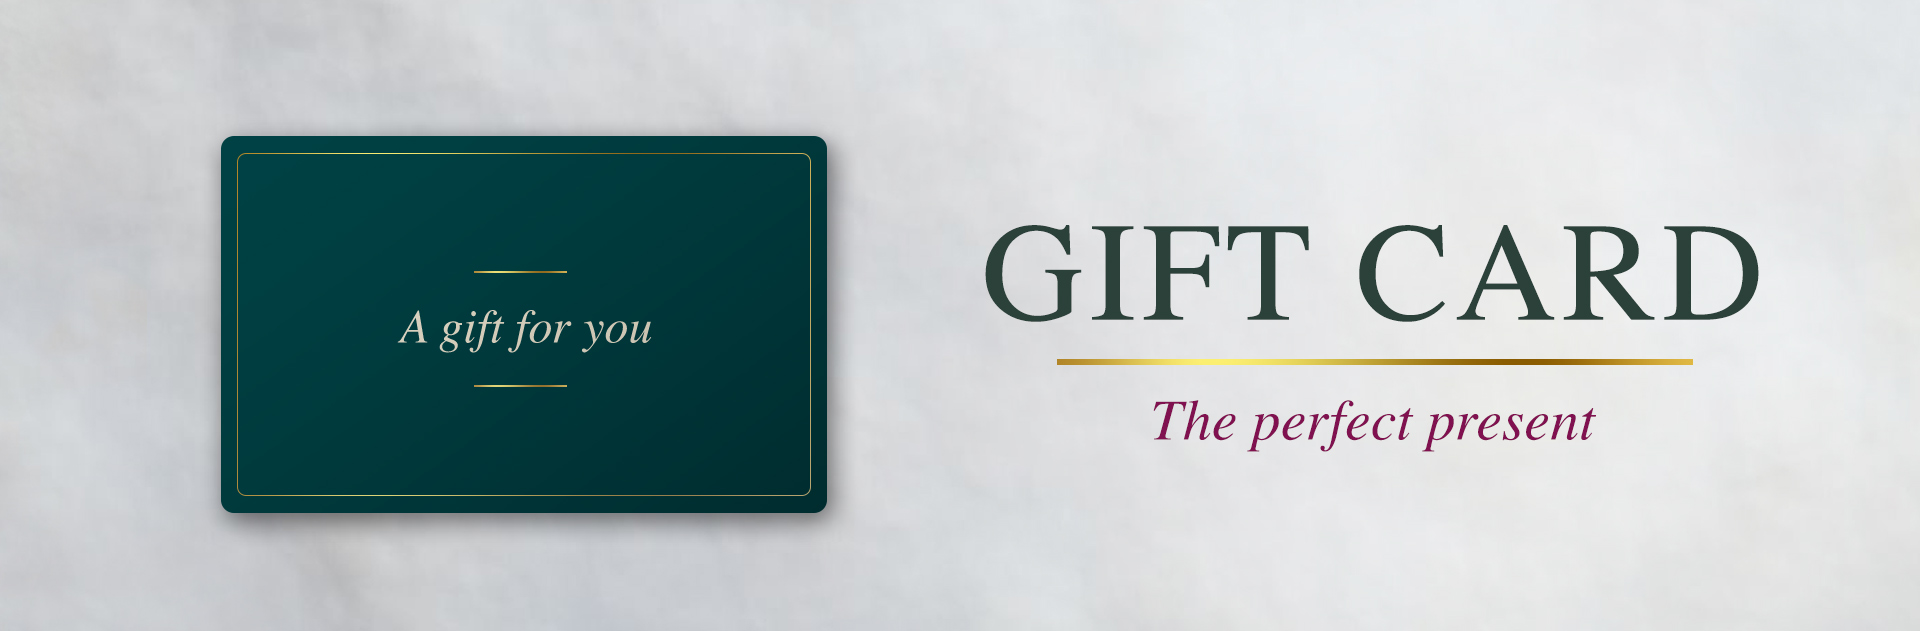 The Centurion Gift Card